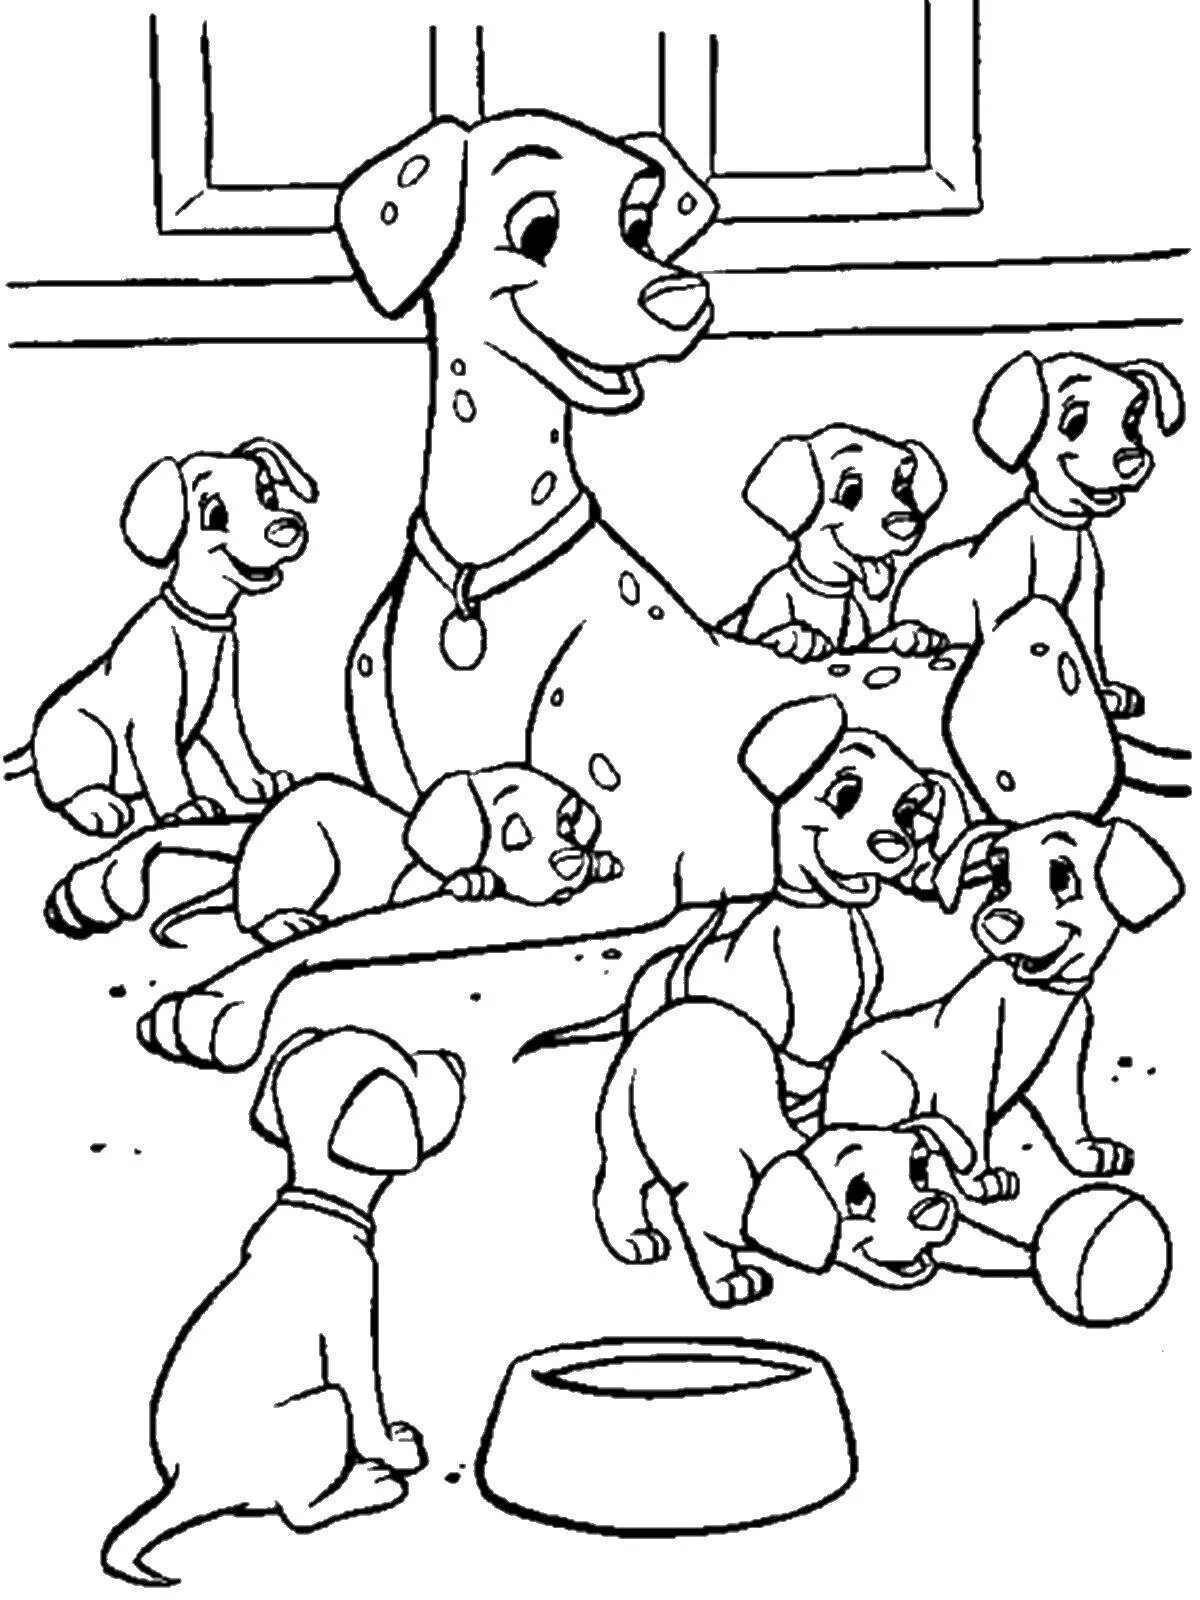 Playable dog family coloring book